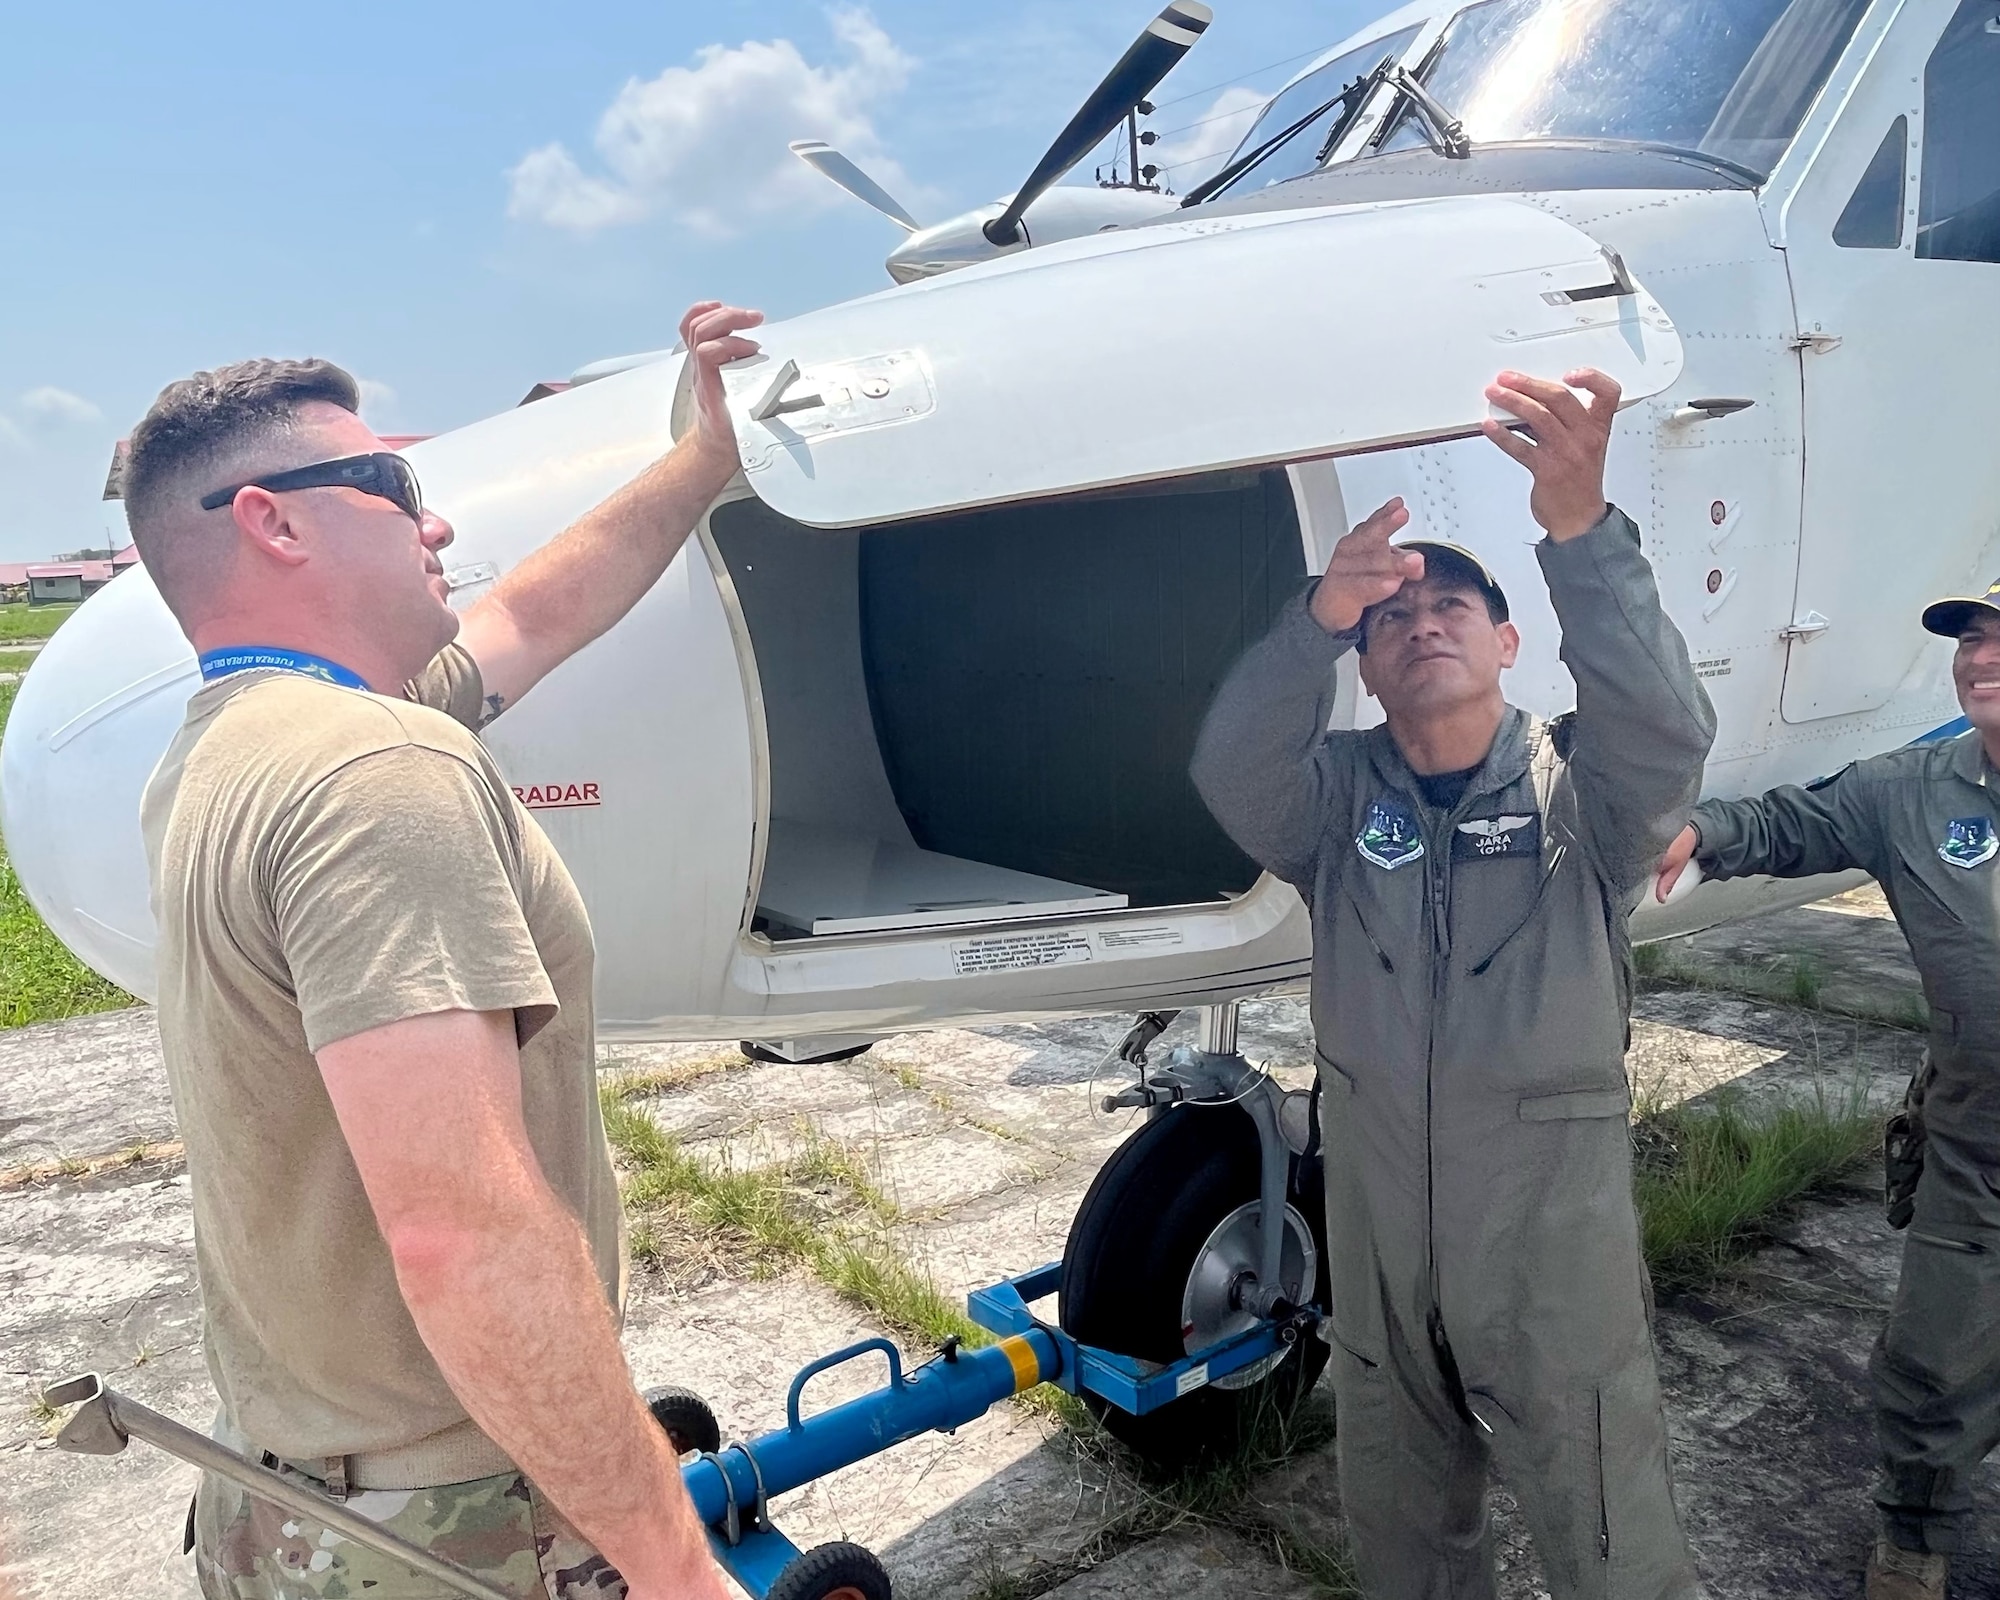 Tech. Sgt. Jacob Haines, left, a 571st Mobility Support Advisory Squadron advisor, inspects a DHC-6 Twin Otter aircraft with Fuerza Aérea de Peru’s Lt. Carlos Benzaquen-Cancela, right, a Grupo Aereo N. 42 DHC-6 instructor pilot, Sept. 1, 2022, in Base Area Coronel Francisco Secada Vignetta Air Base, Peru. The DHC-6 Twin Otter aircraft was a focal point during the out-in-the-field training between the two air force military service organizations. (U.S. Air Force photo by Tech. Sgt. Anthony Garcia)